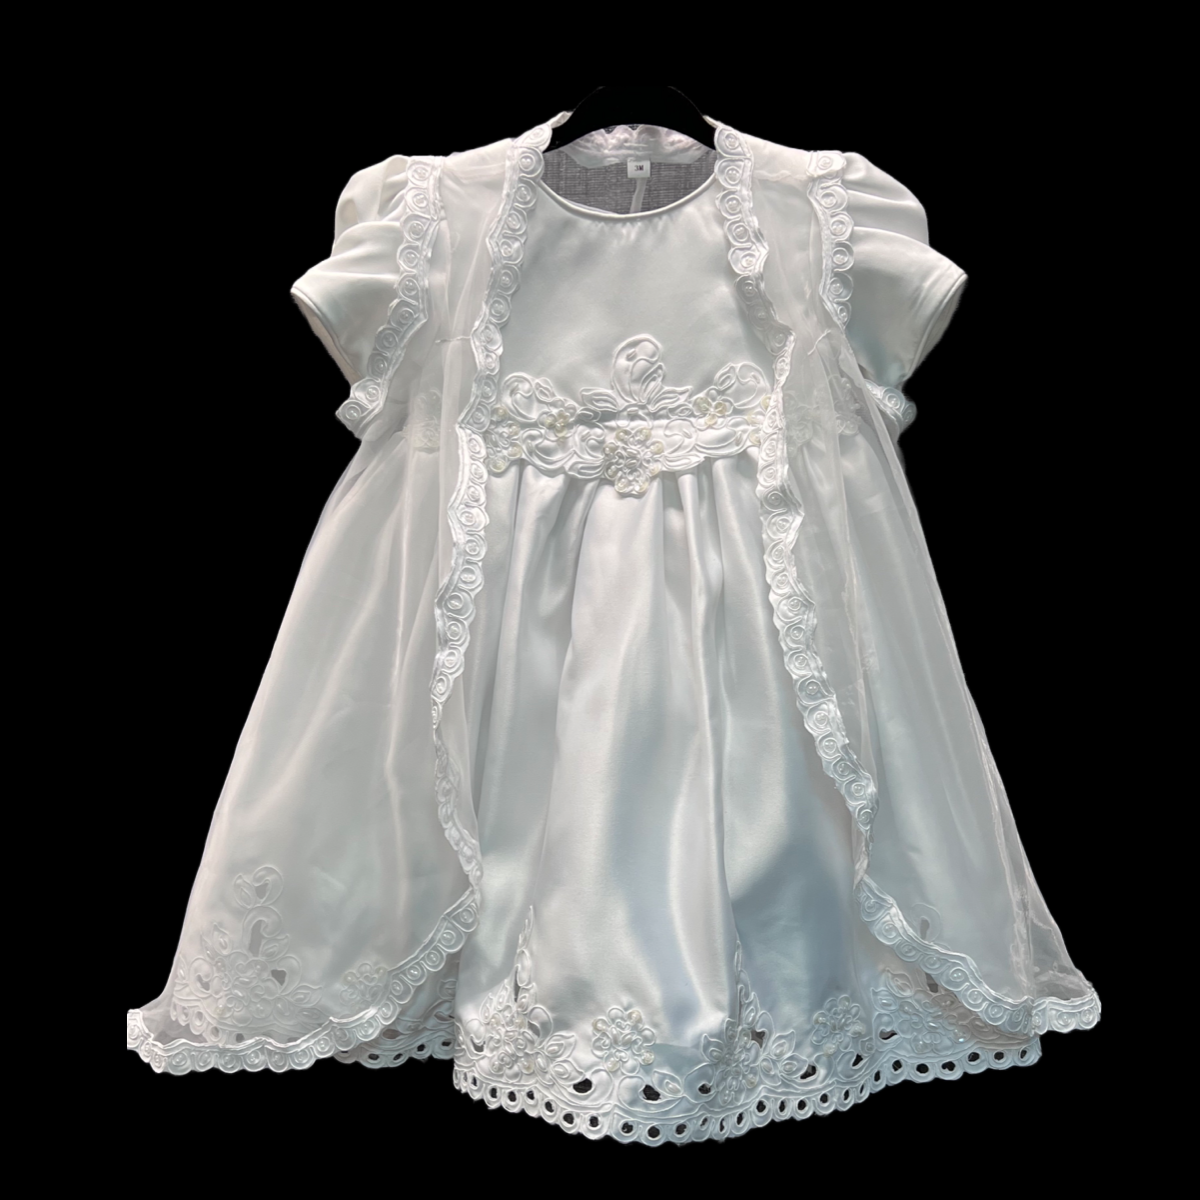 Embroidered 3-Piece Christening Gown